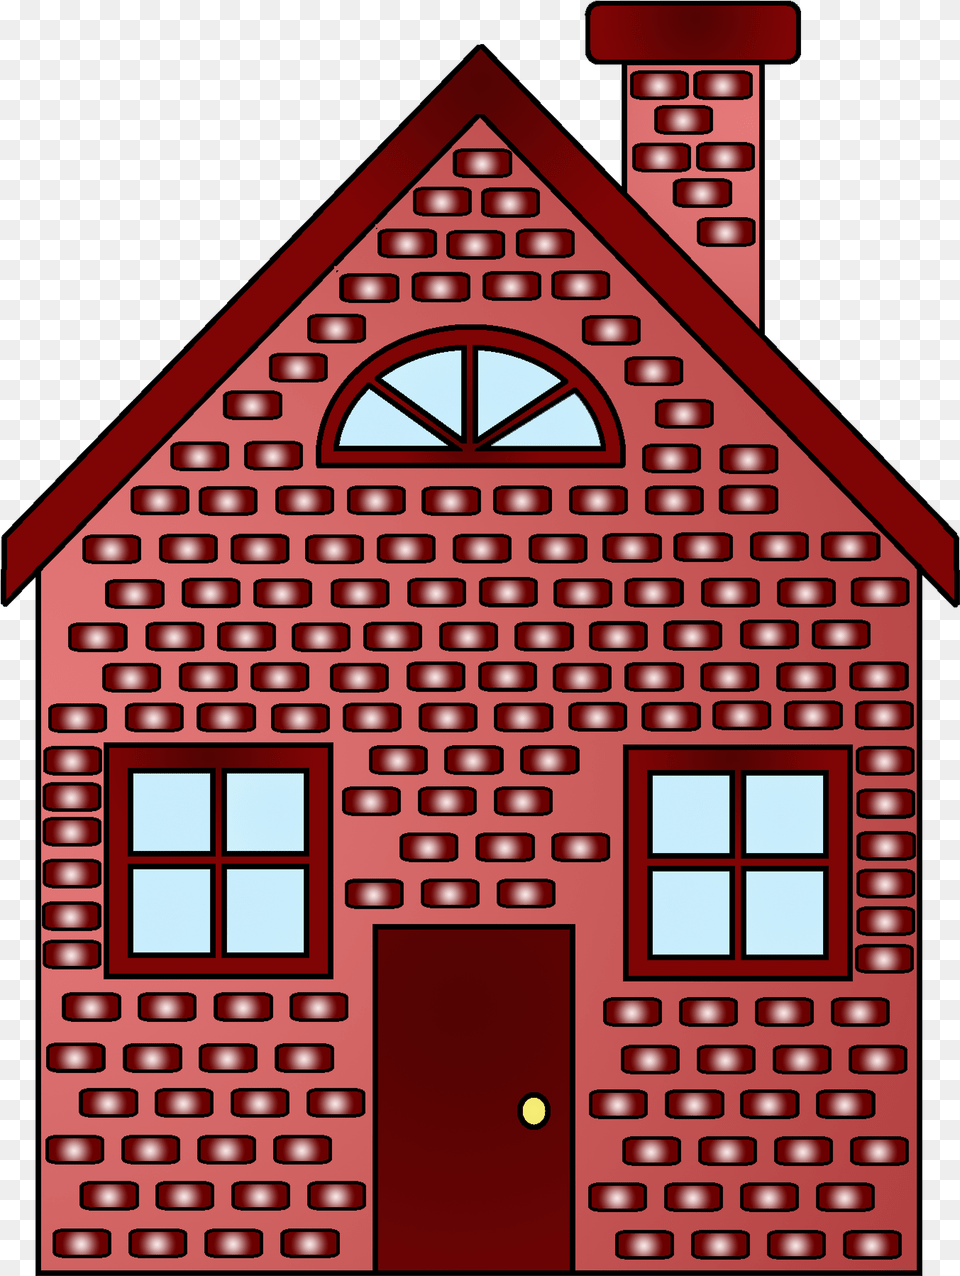 Bricks Clipart Brickwork 3 Little Pigs Houses Brick, Nature, Outdoors, Architecture, Barn Free Png Download